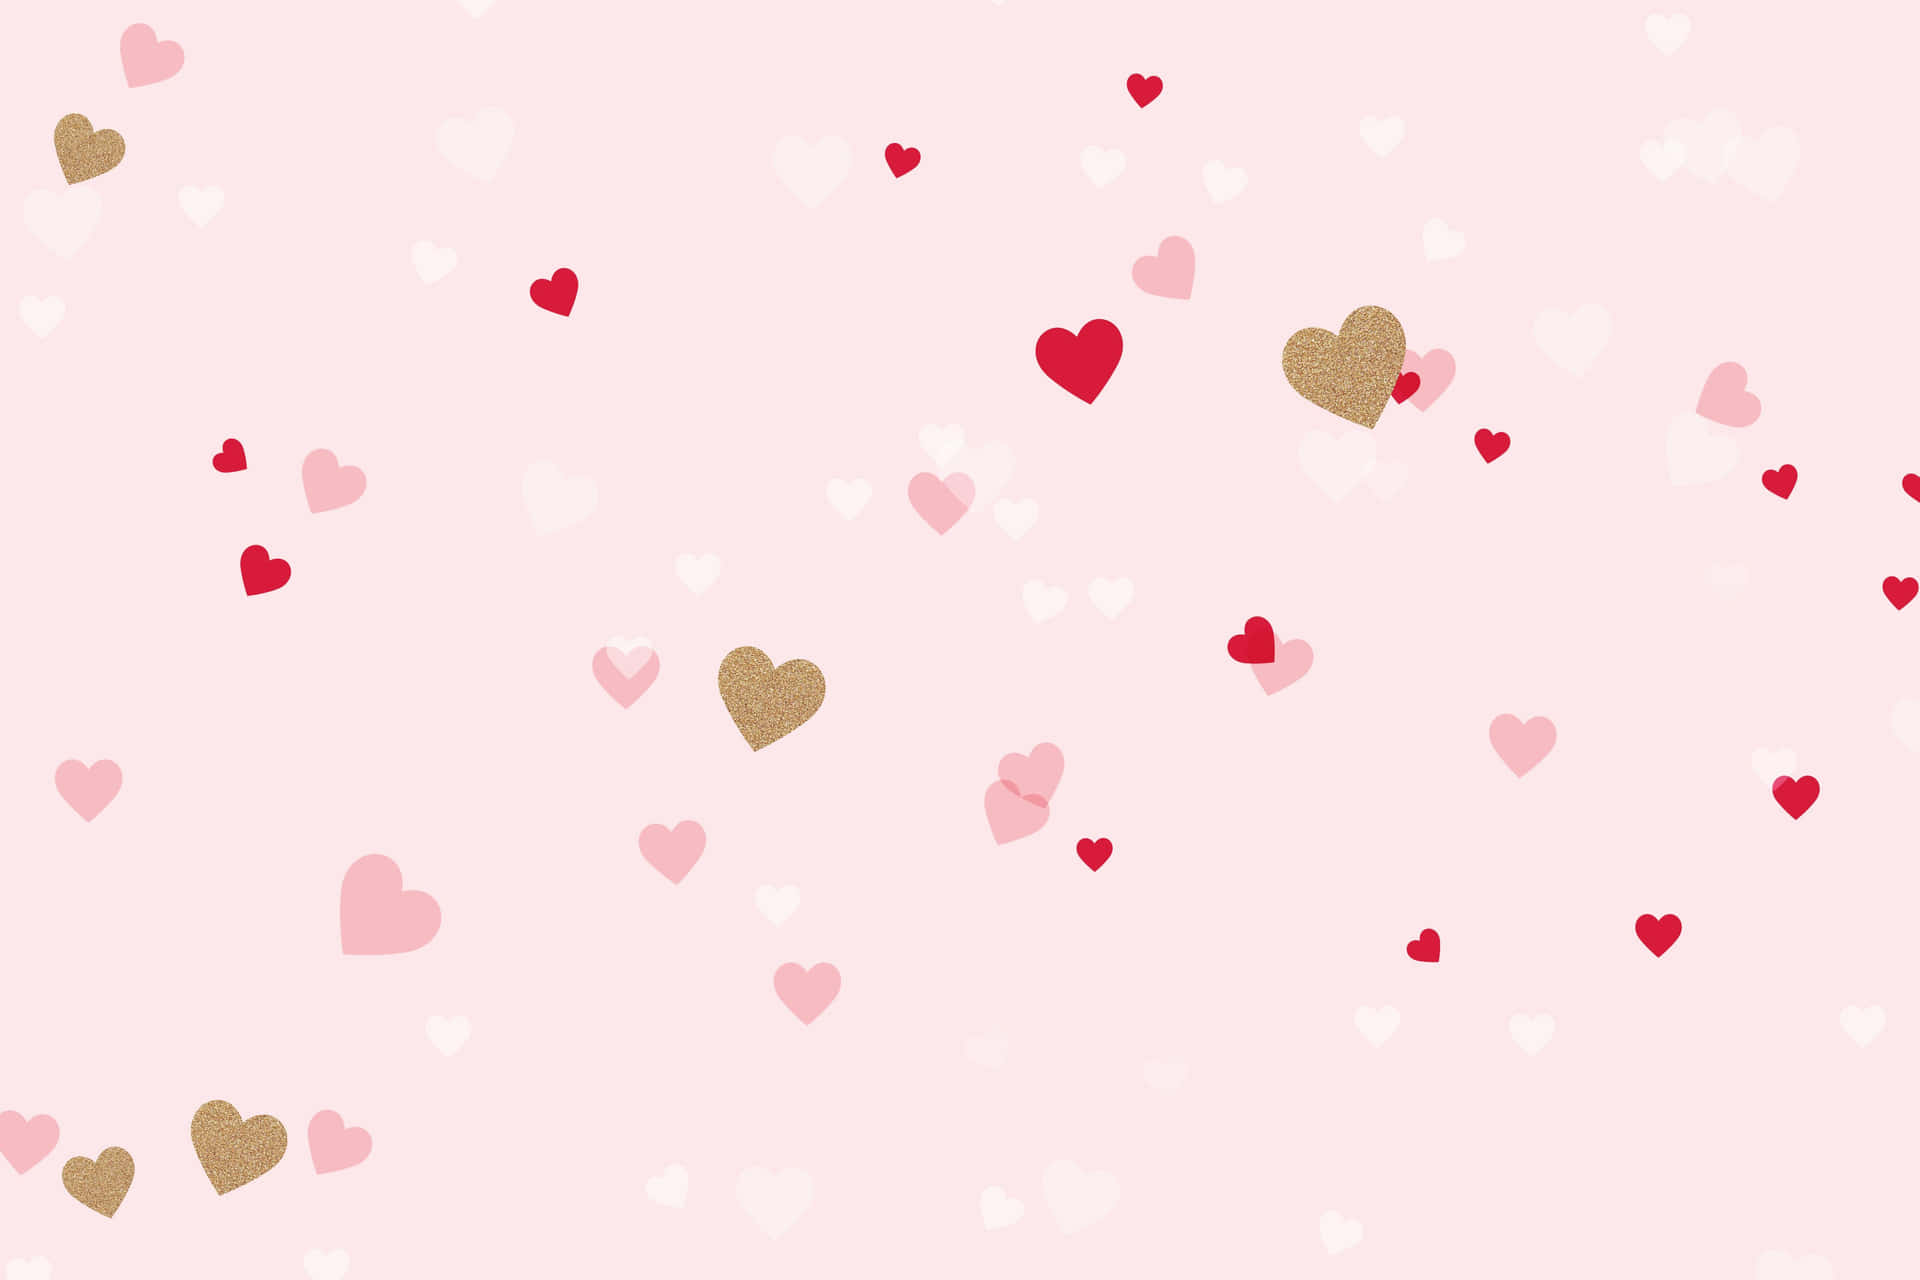 Cute Mini Hearts On Pink Background